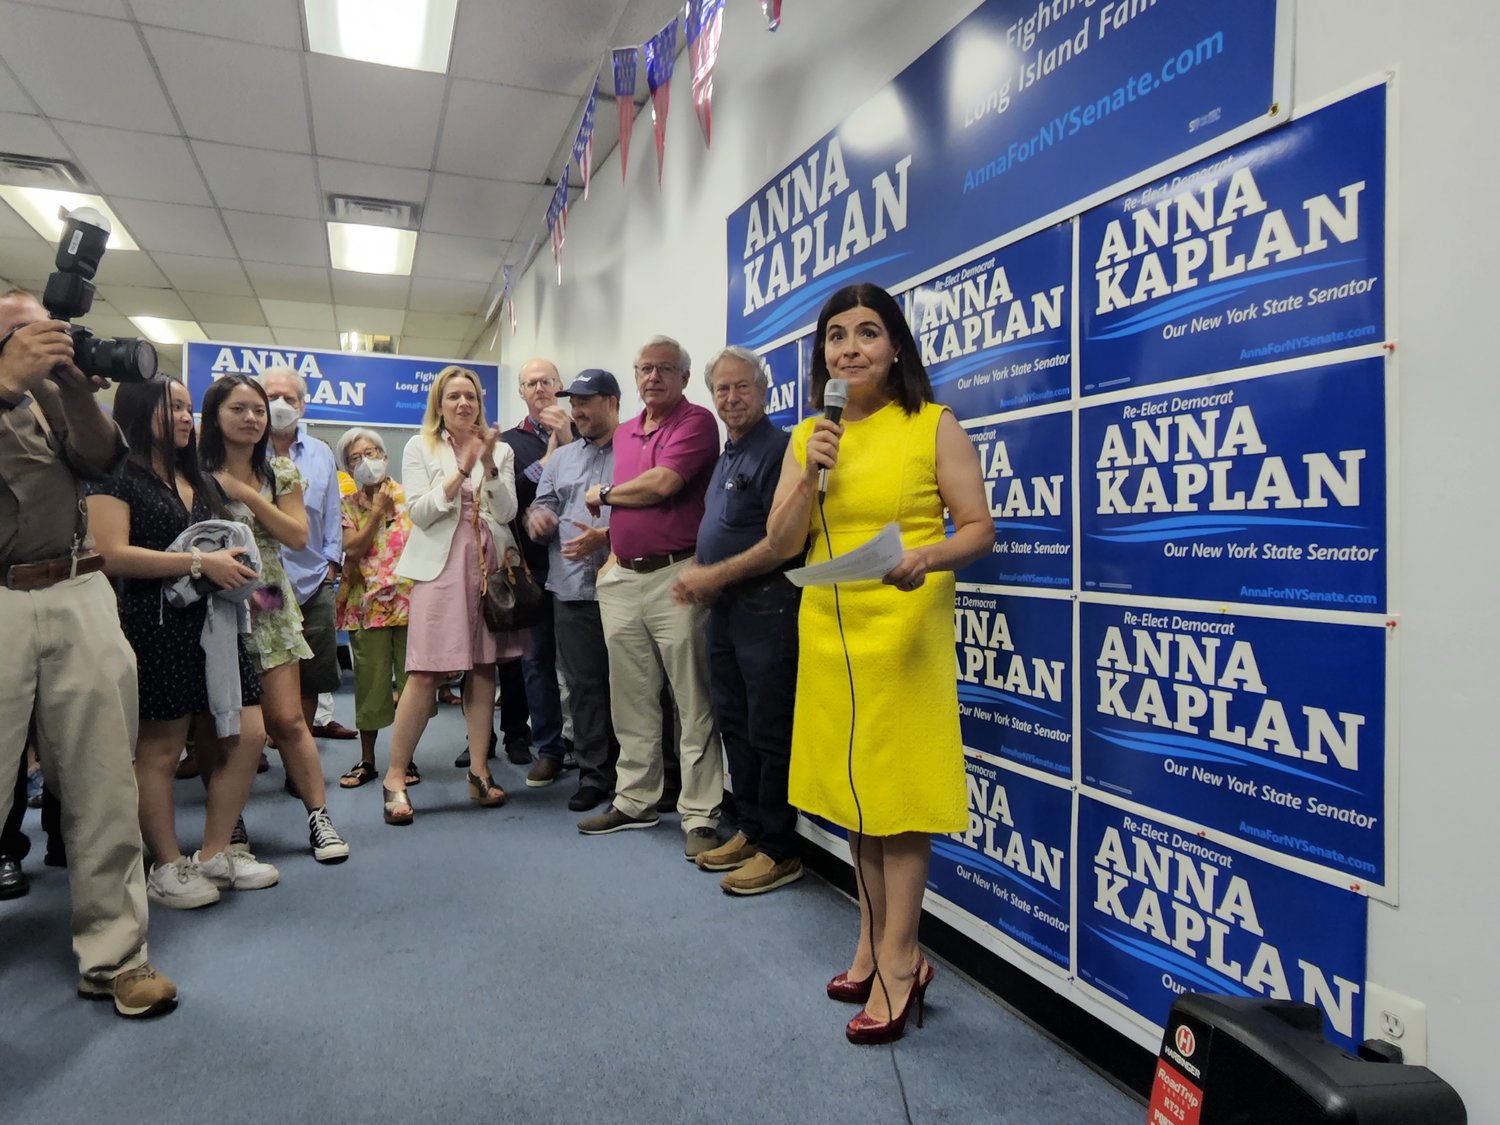 State Senator Anna Kaplan, right, at her campaign headquarters in Glen Cove spoke of her commitment to the community after she won the Democratic primary on Tuesday.